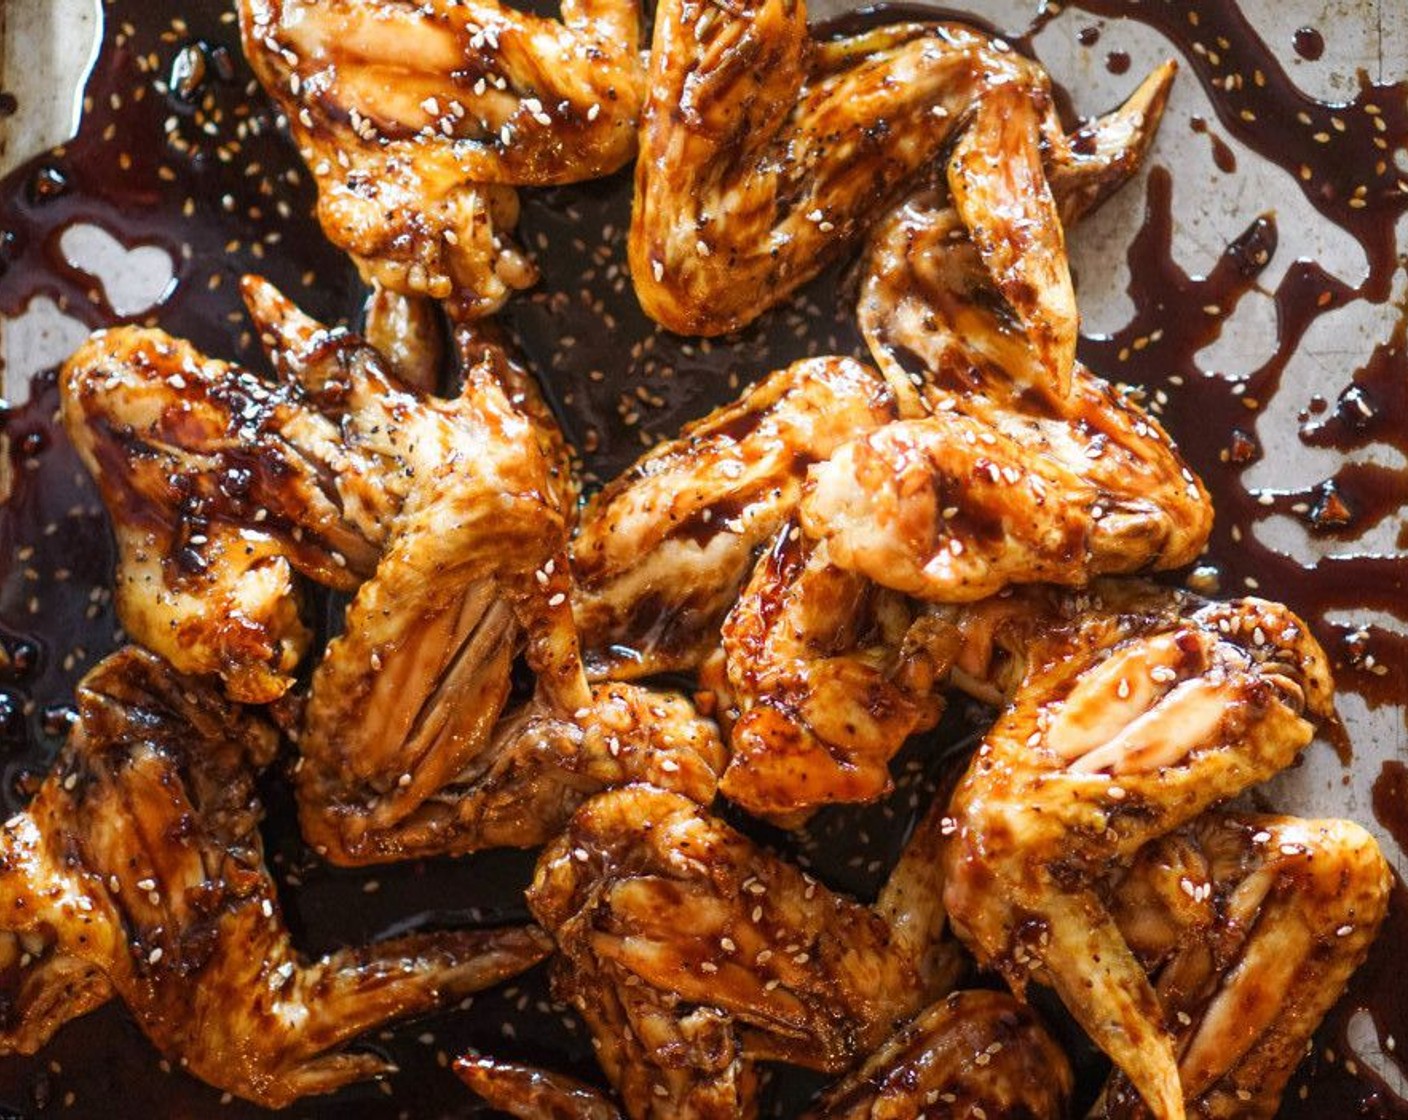 step 8 Transfer the wings to a crock pot set at low. Add the teriyaki sauce and toss to fully coat the wings. You want to make sure the wings are kept at at least 140 degrees F (60 degrees C) to keep them safe for eating.